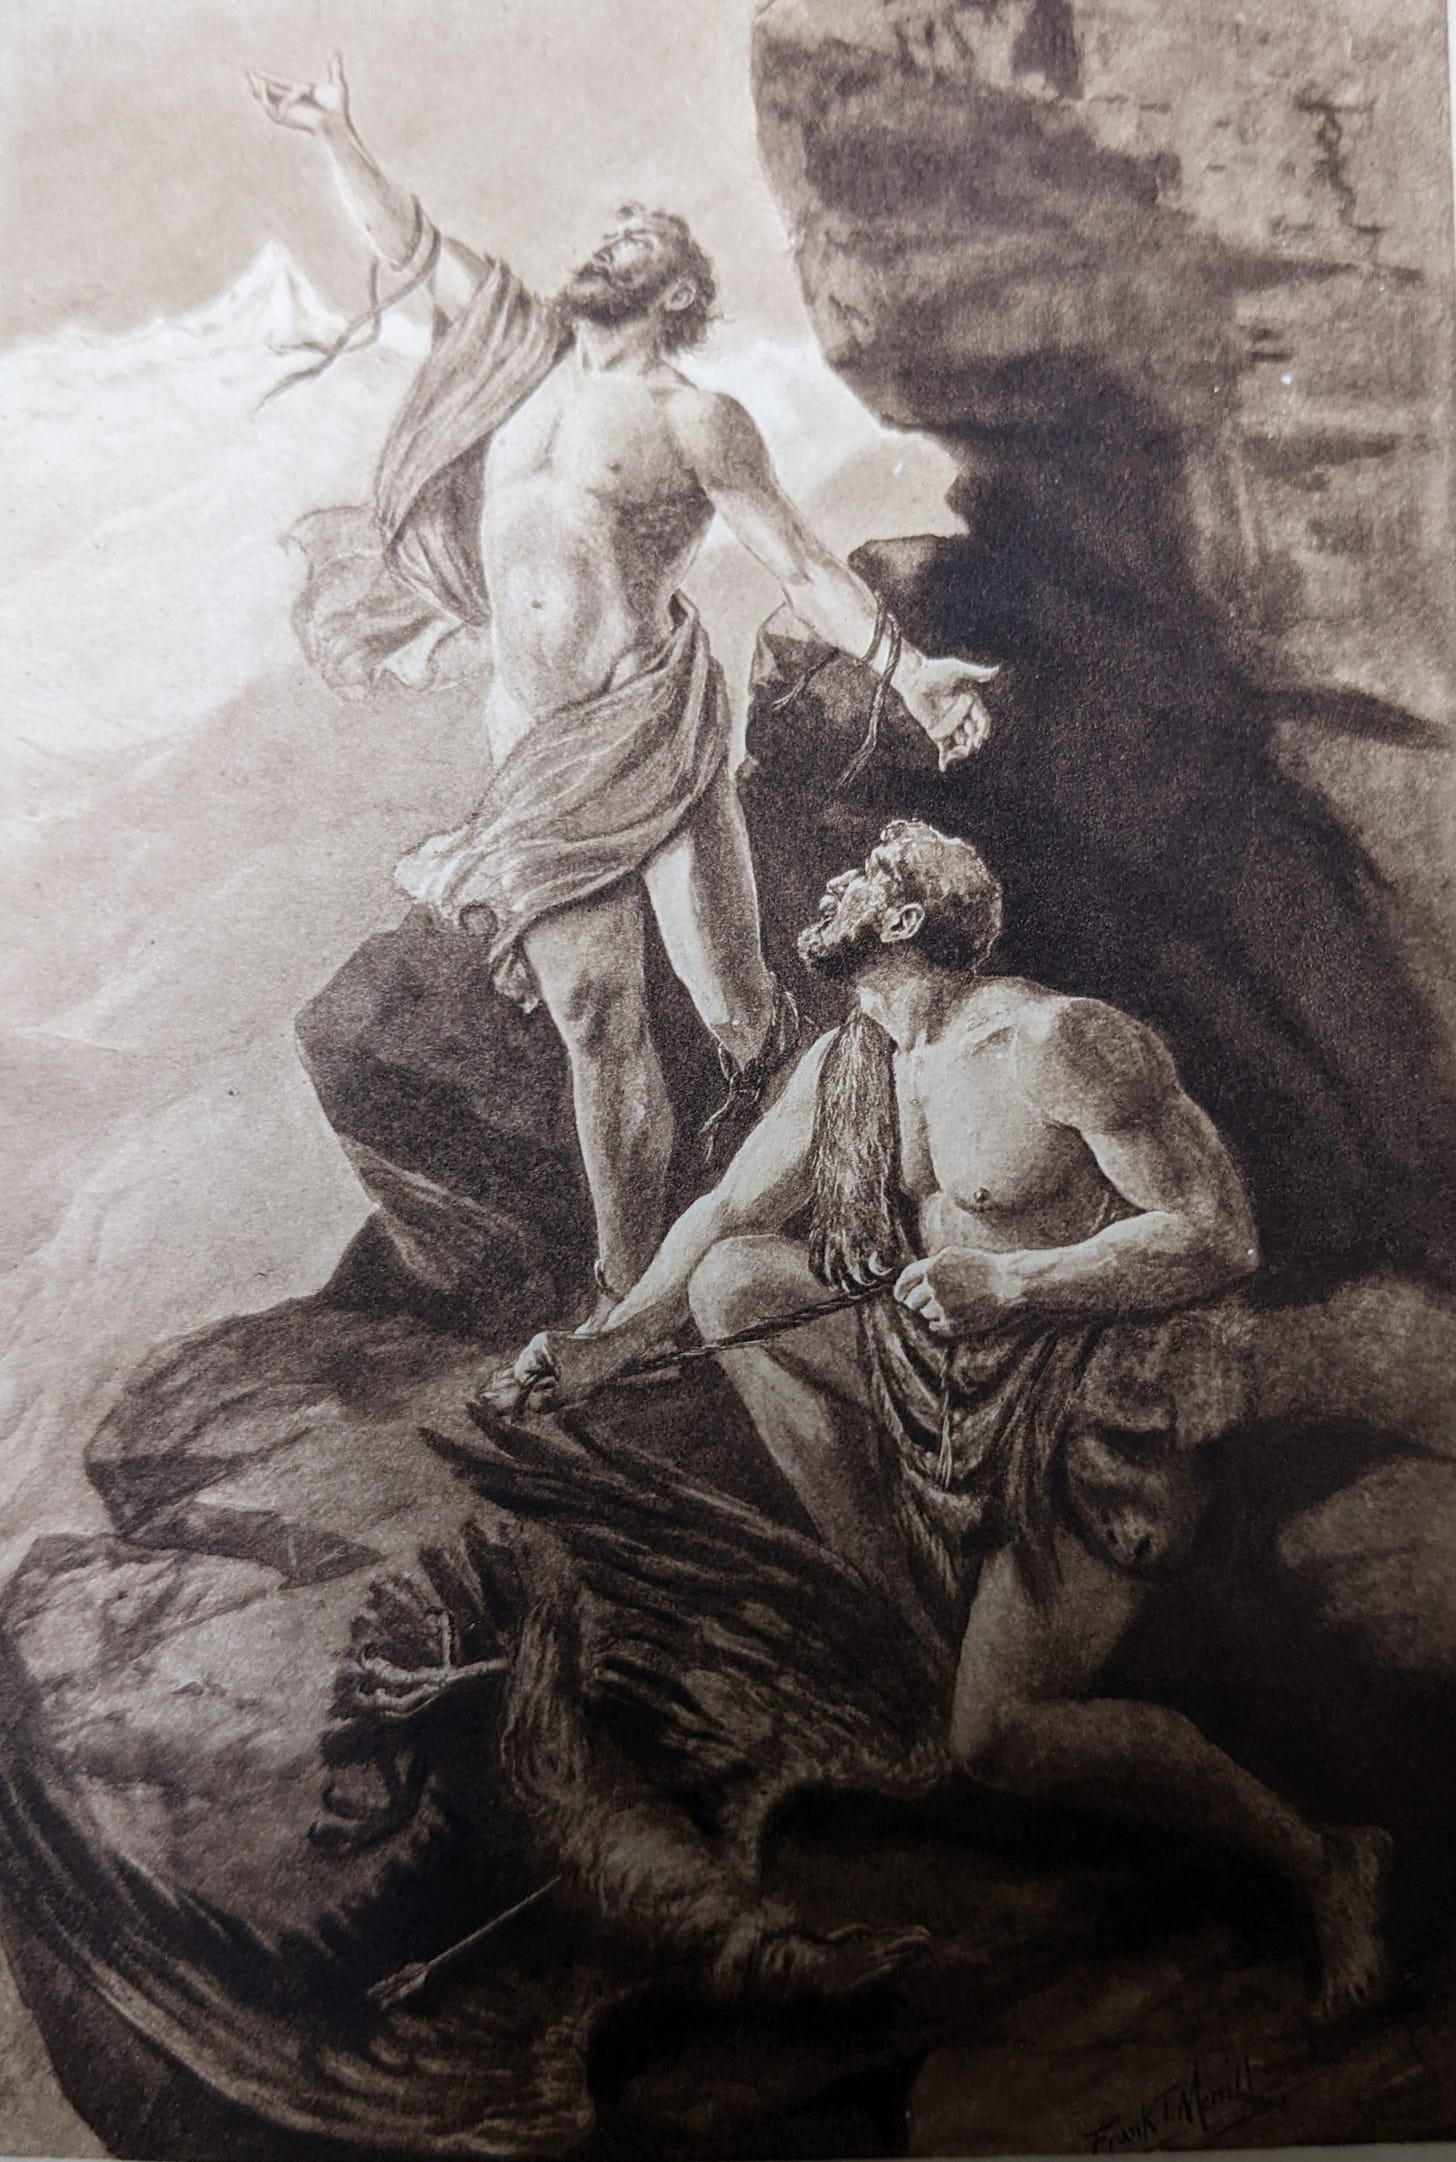 "An artistic grayscale illustration depicting two classical male figures. One figure stands dramatically on the left, gesturing upwards with one hand, while the other hand holds chains that bind the second figure. The chained figure sits despondently on a rock to the right, looking up at the first man. Behind them, a shadowed landscape and ethereal light set a dramatic tone. The artwork has intricate shading and detailing, with the artist's signature at the bottom right."